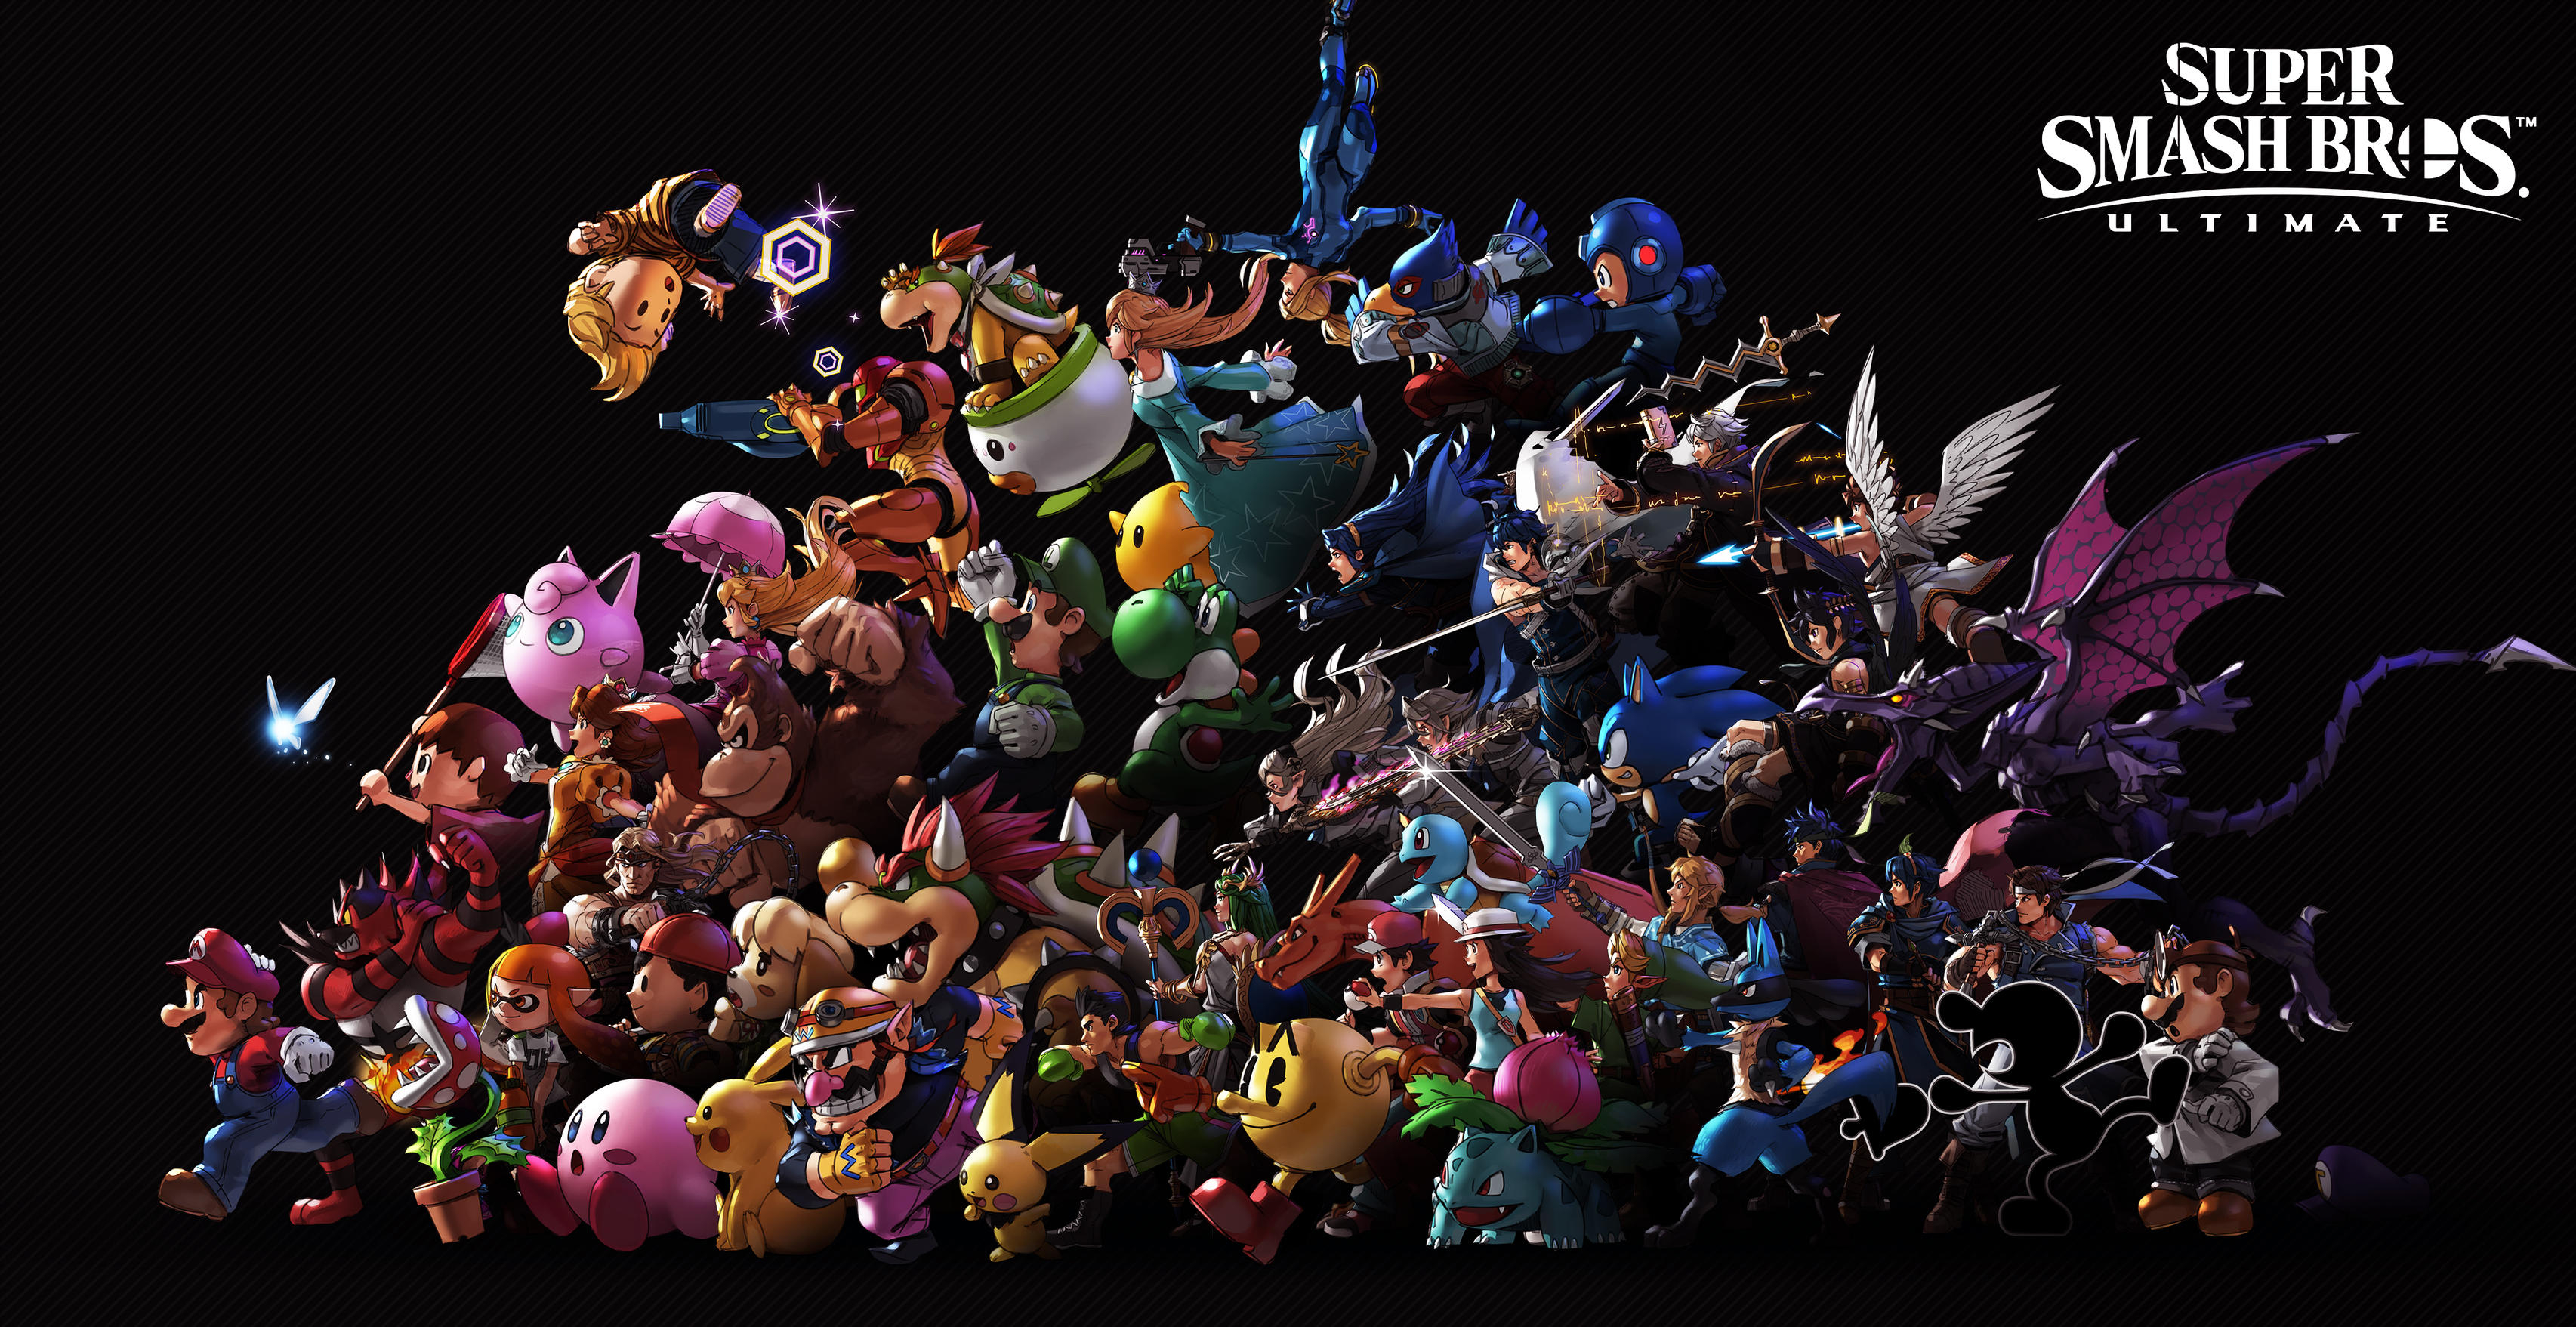 3411x1757 270+ Super Smash Bros. Ultimate HD Wallpapers and Backgrounds